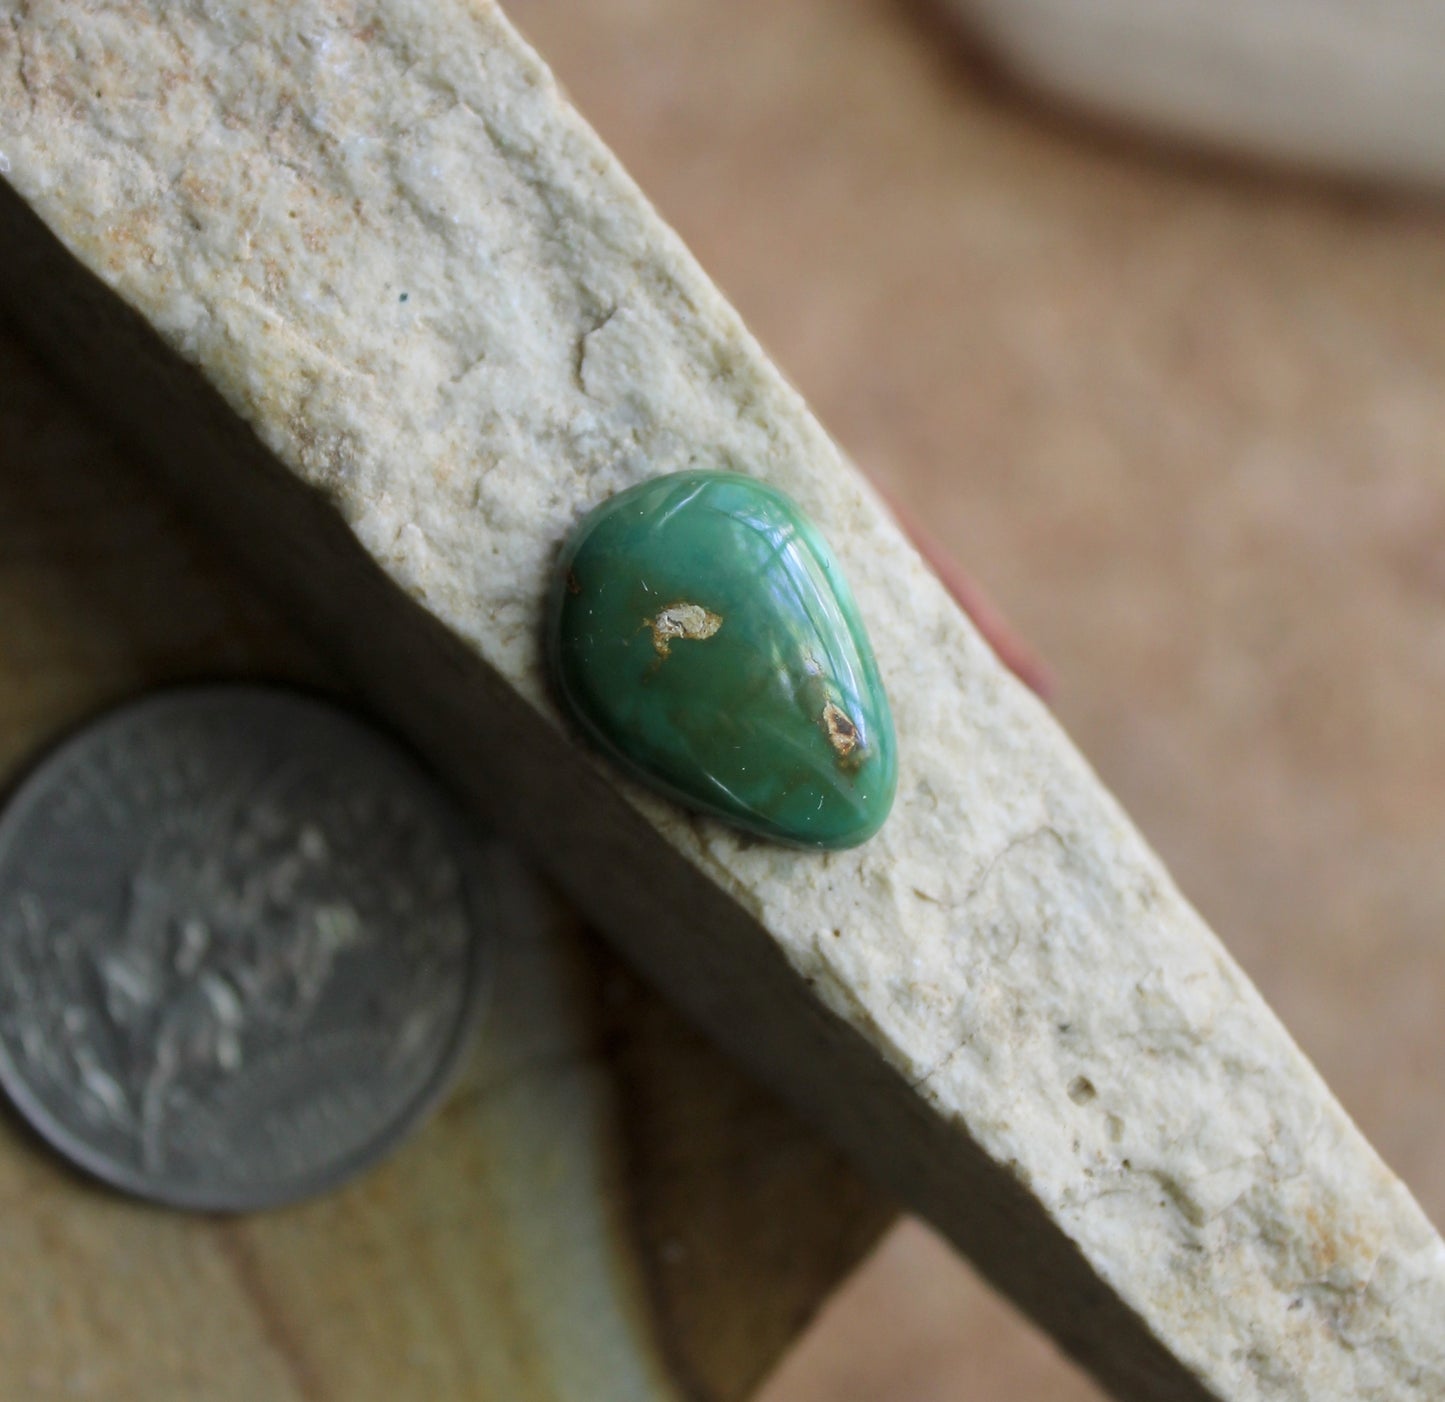 7.5 carat green turquoise cabochon from Stone Mountain Mine